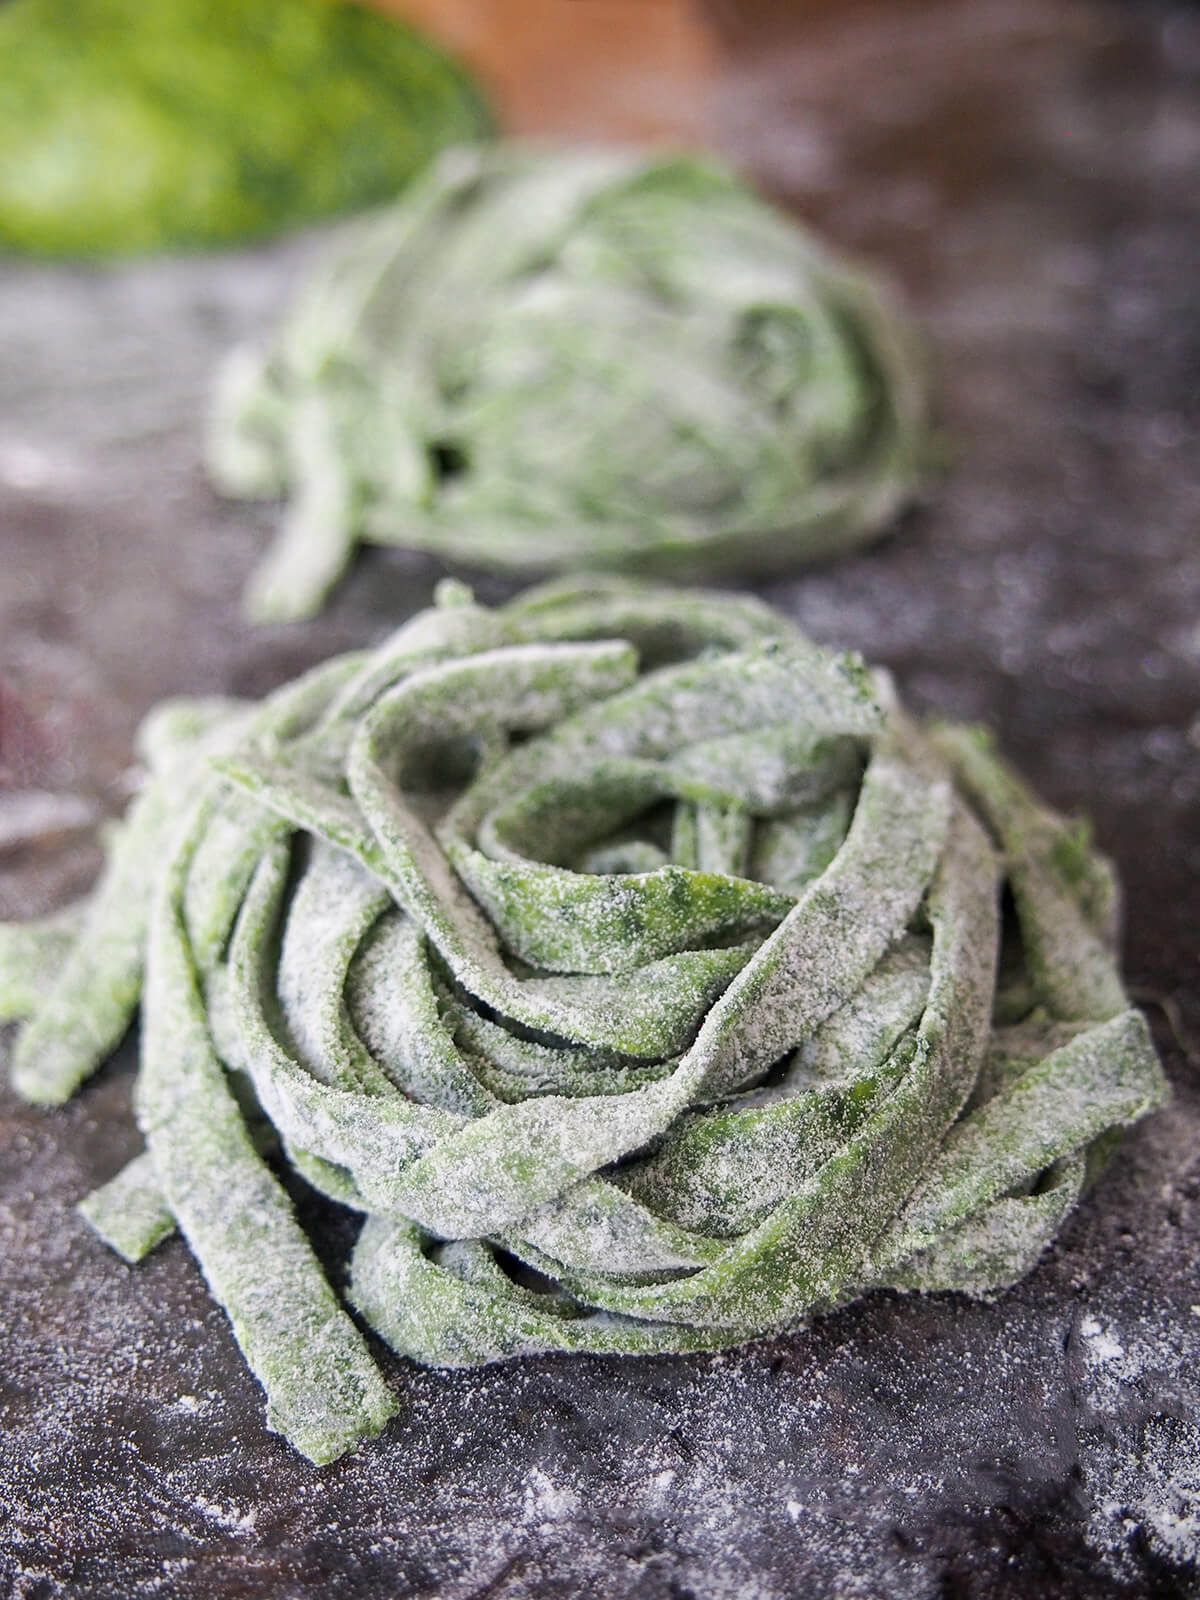 stacks of uncooked cut fresh spinach pasta dough cut in linguine, dusted with flour